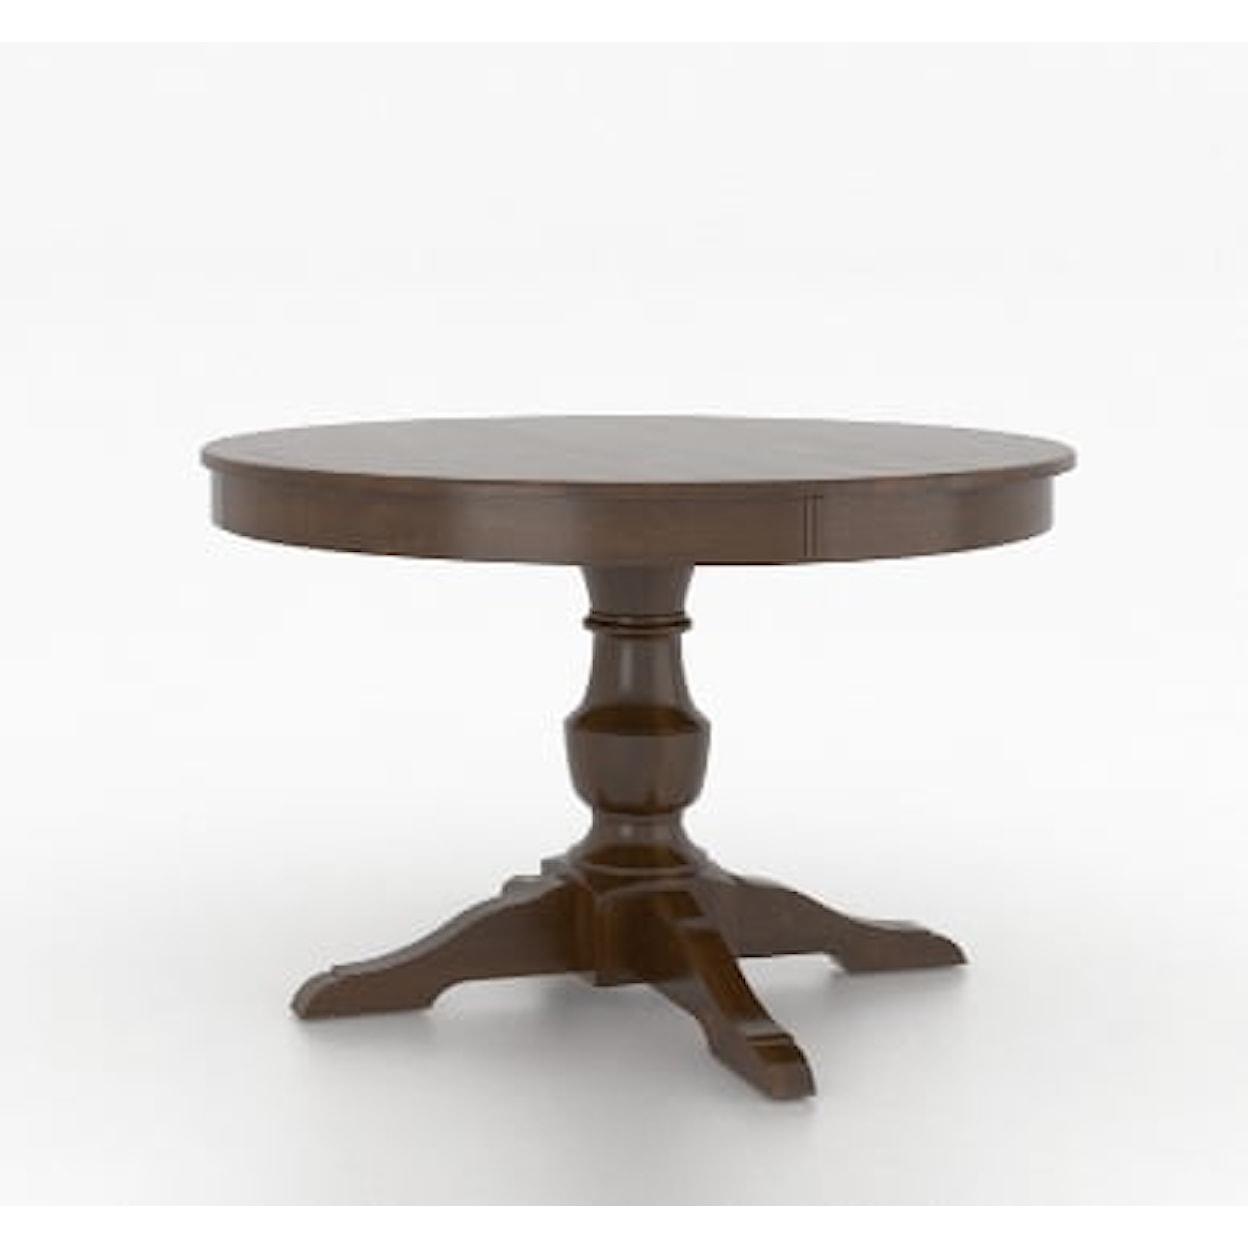 Canadel Canadel Round Wood Dining Table